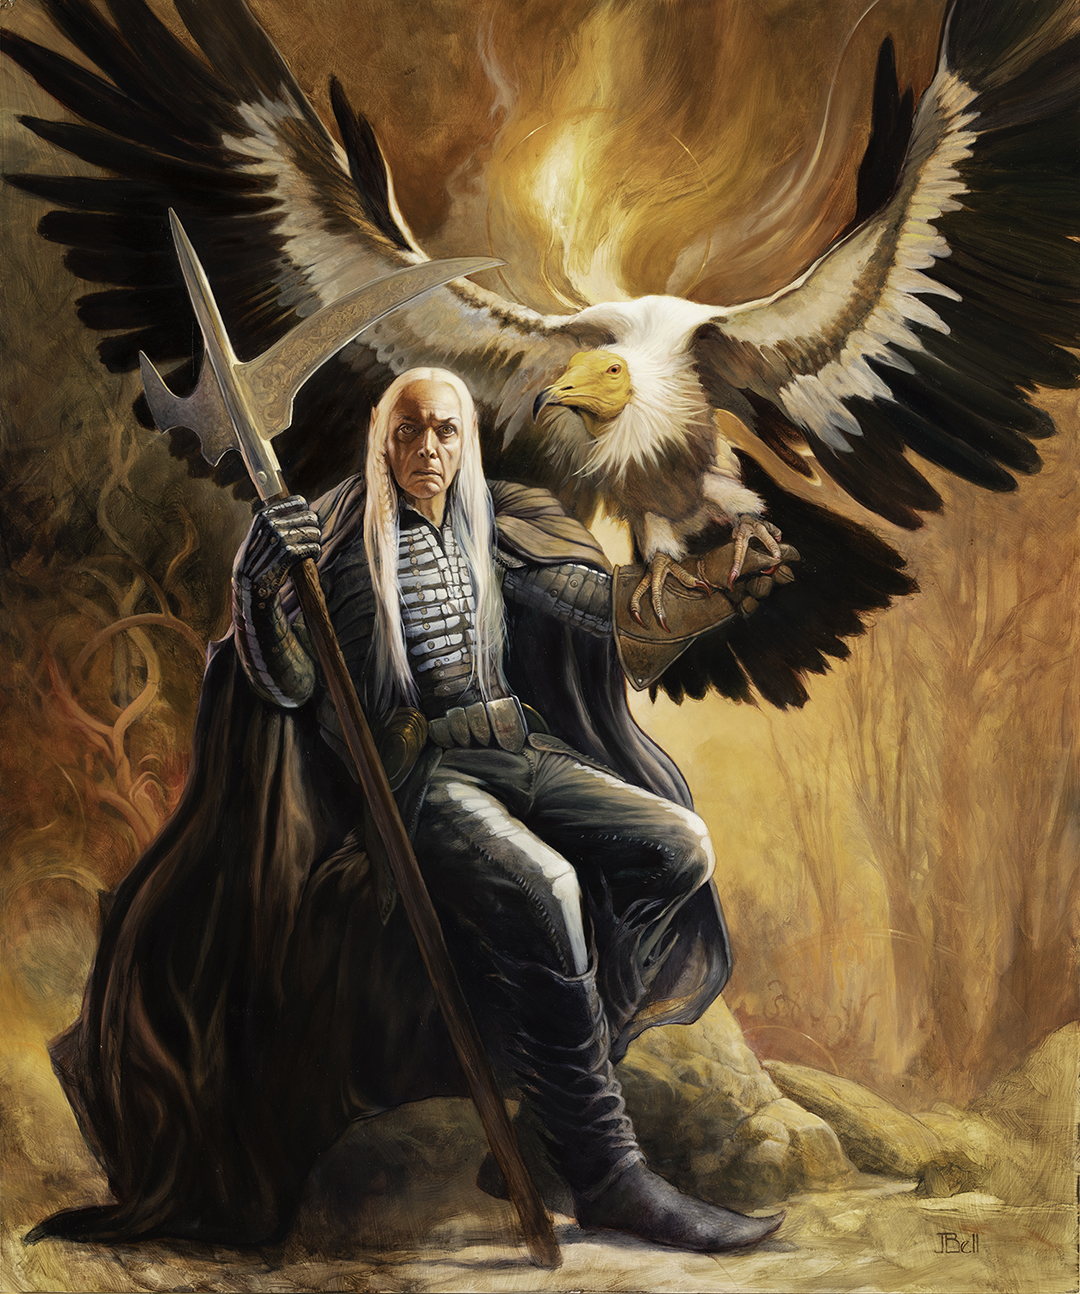 An older male elf sits on a rock holding a scythe with an eagle on its arm.